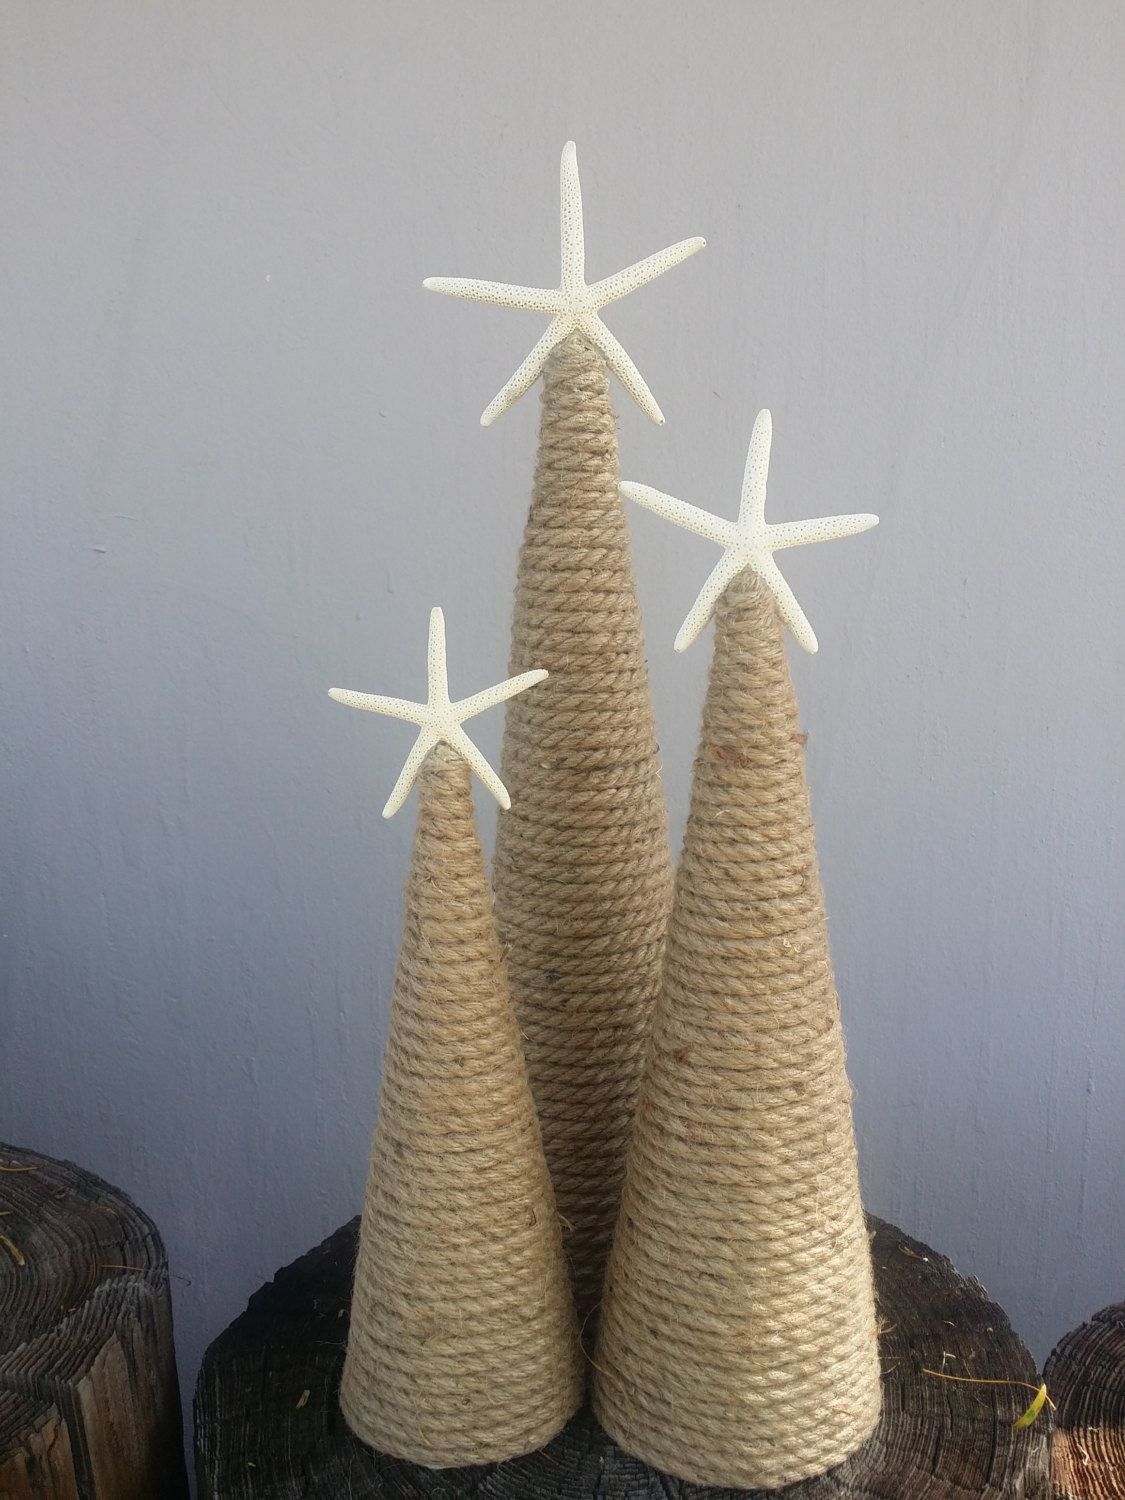 Nautical Rope Starfish Tree Natural Coastal Home Decor Christmas by the Sea Accents Topped w/ White Star Rustic Cottage Style